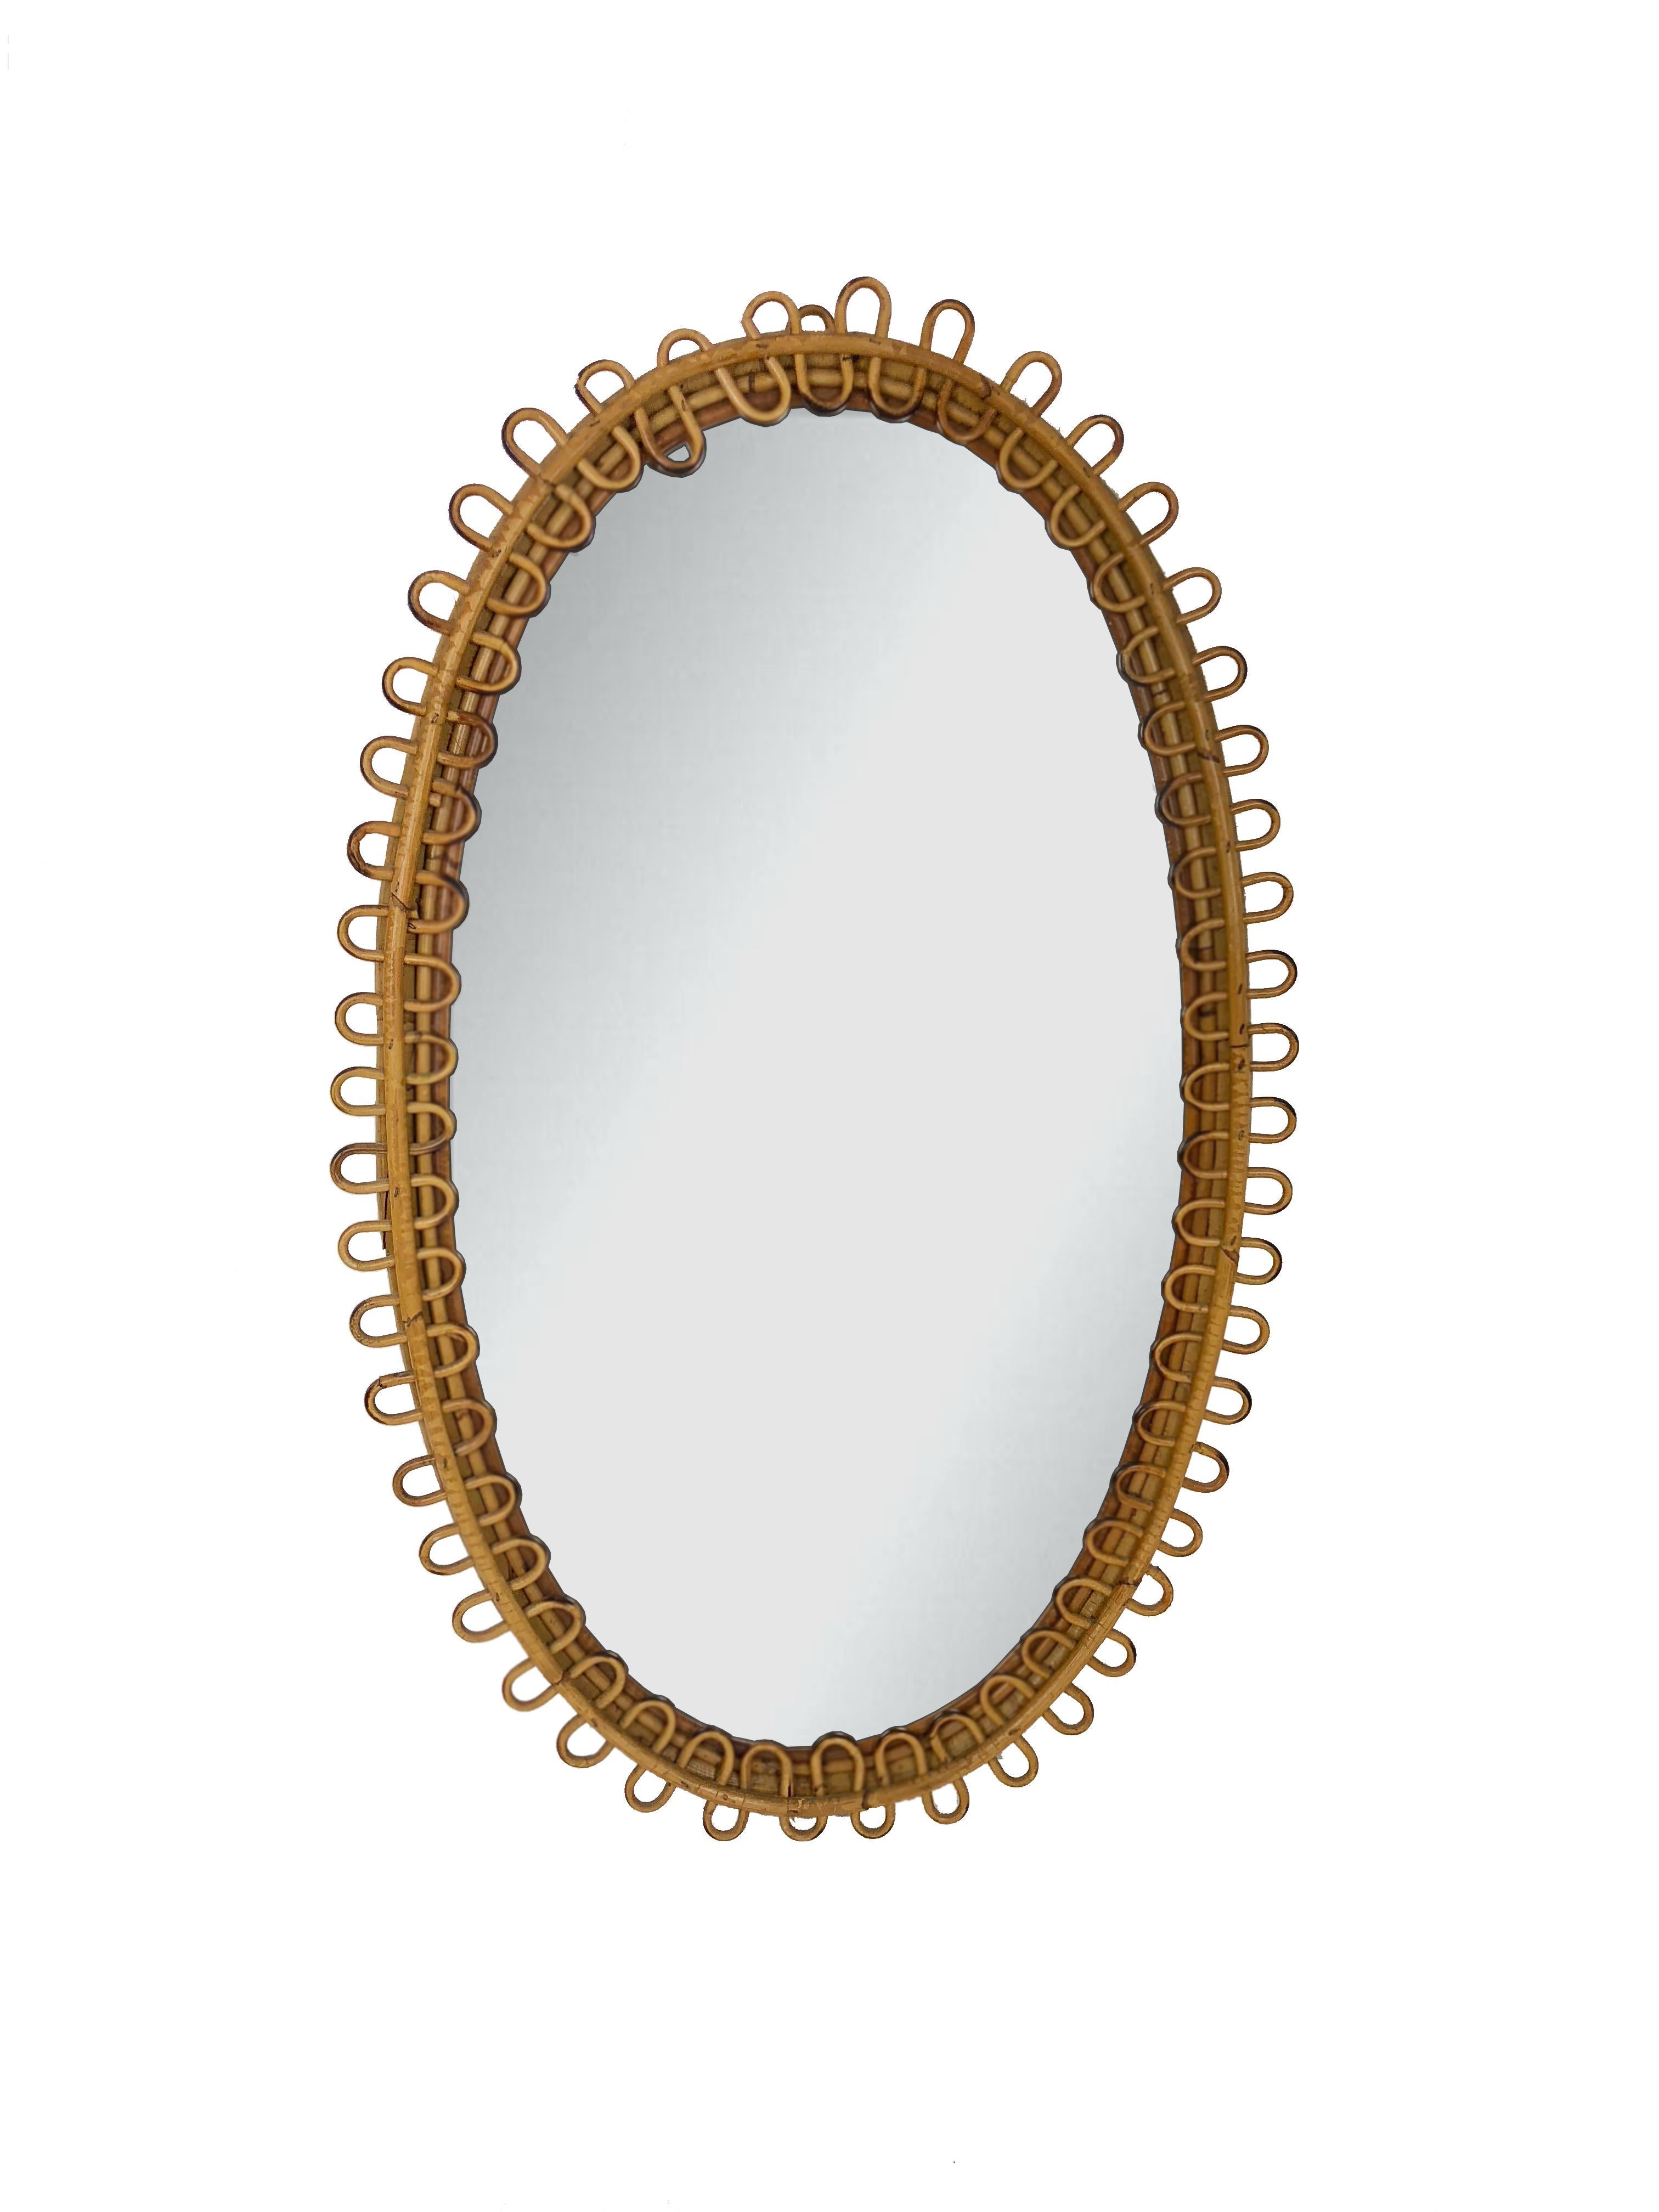 Charming French Riviera rattan mirror. The undulating border is reminiscent of many Jean Royère designs.